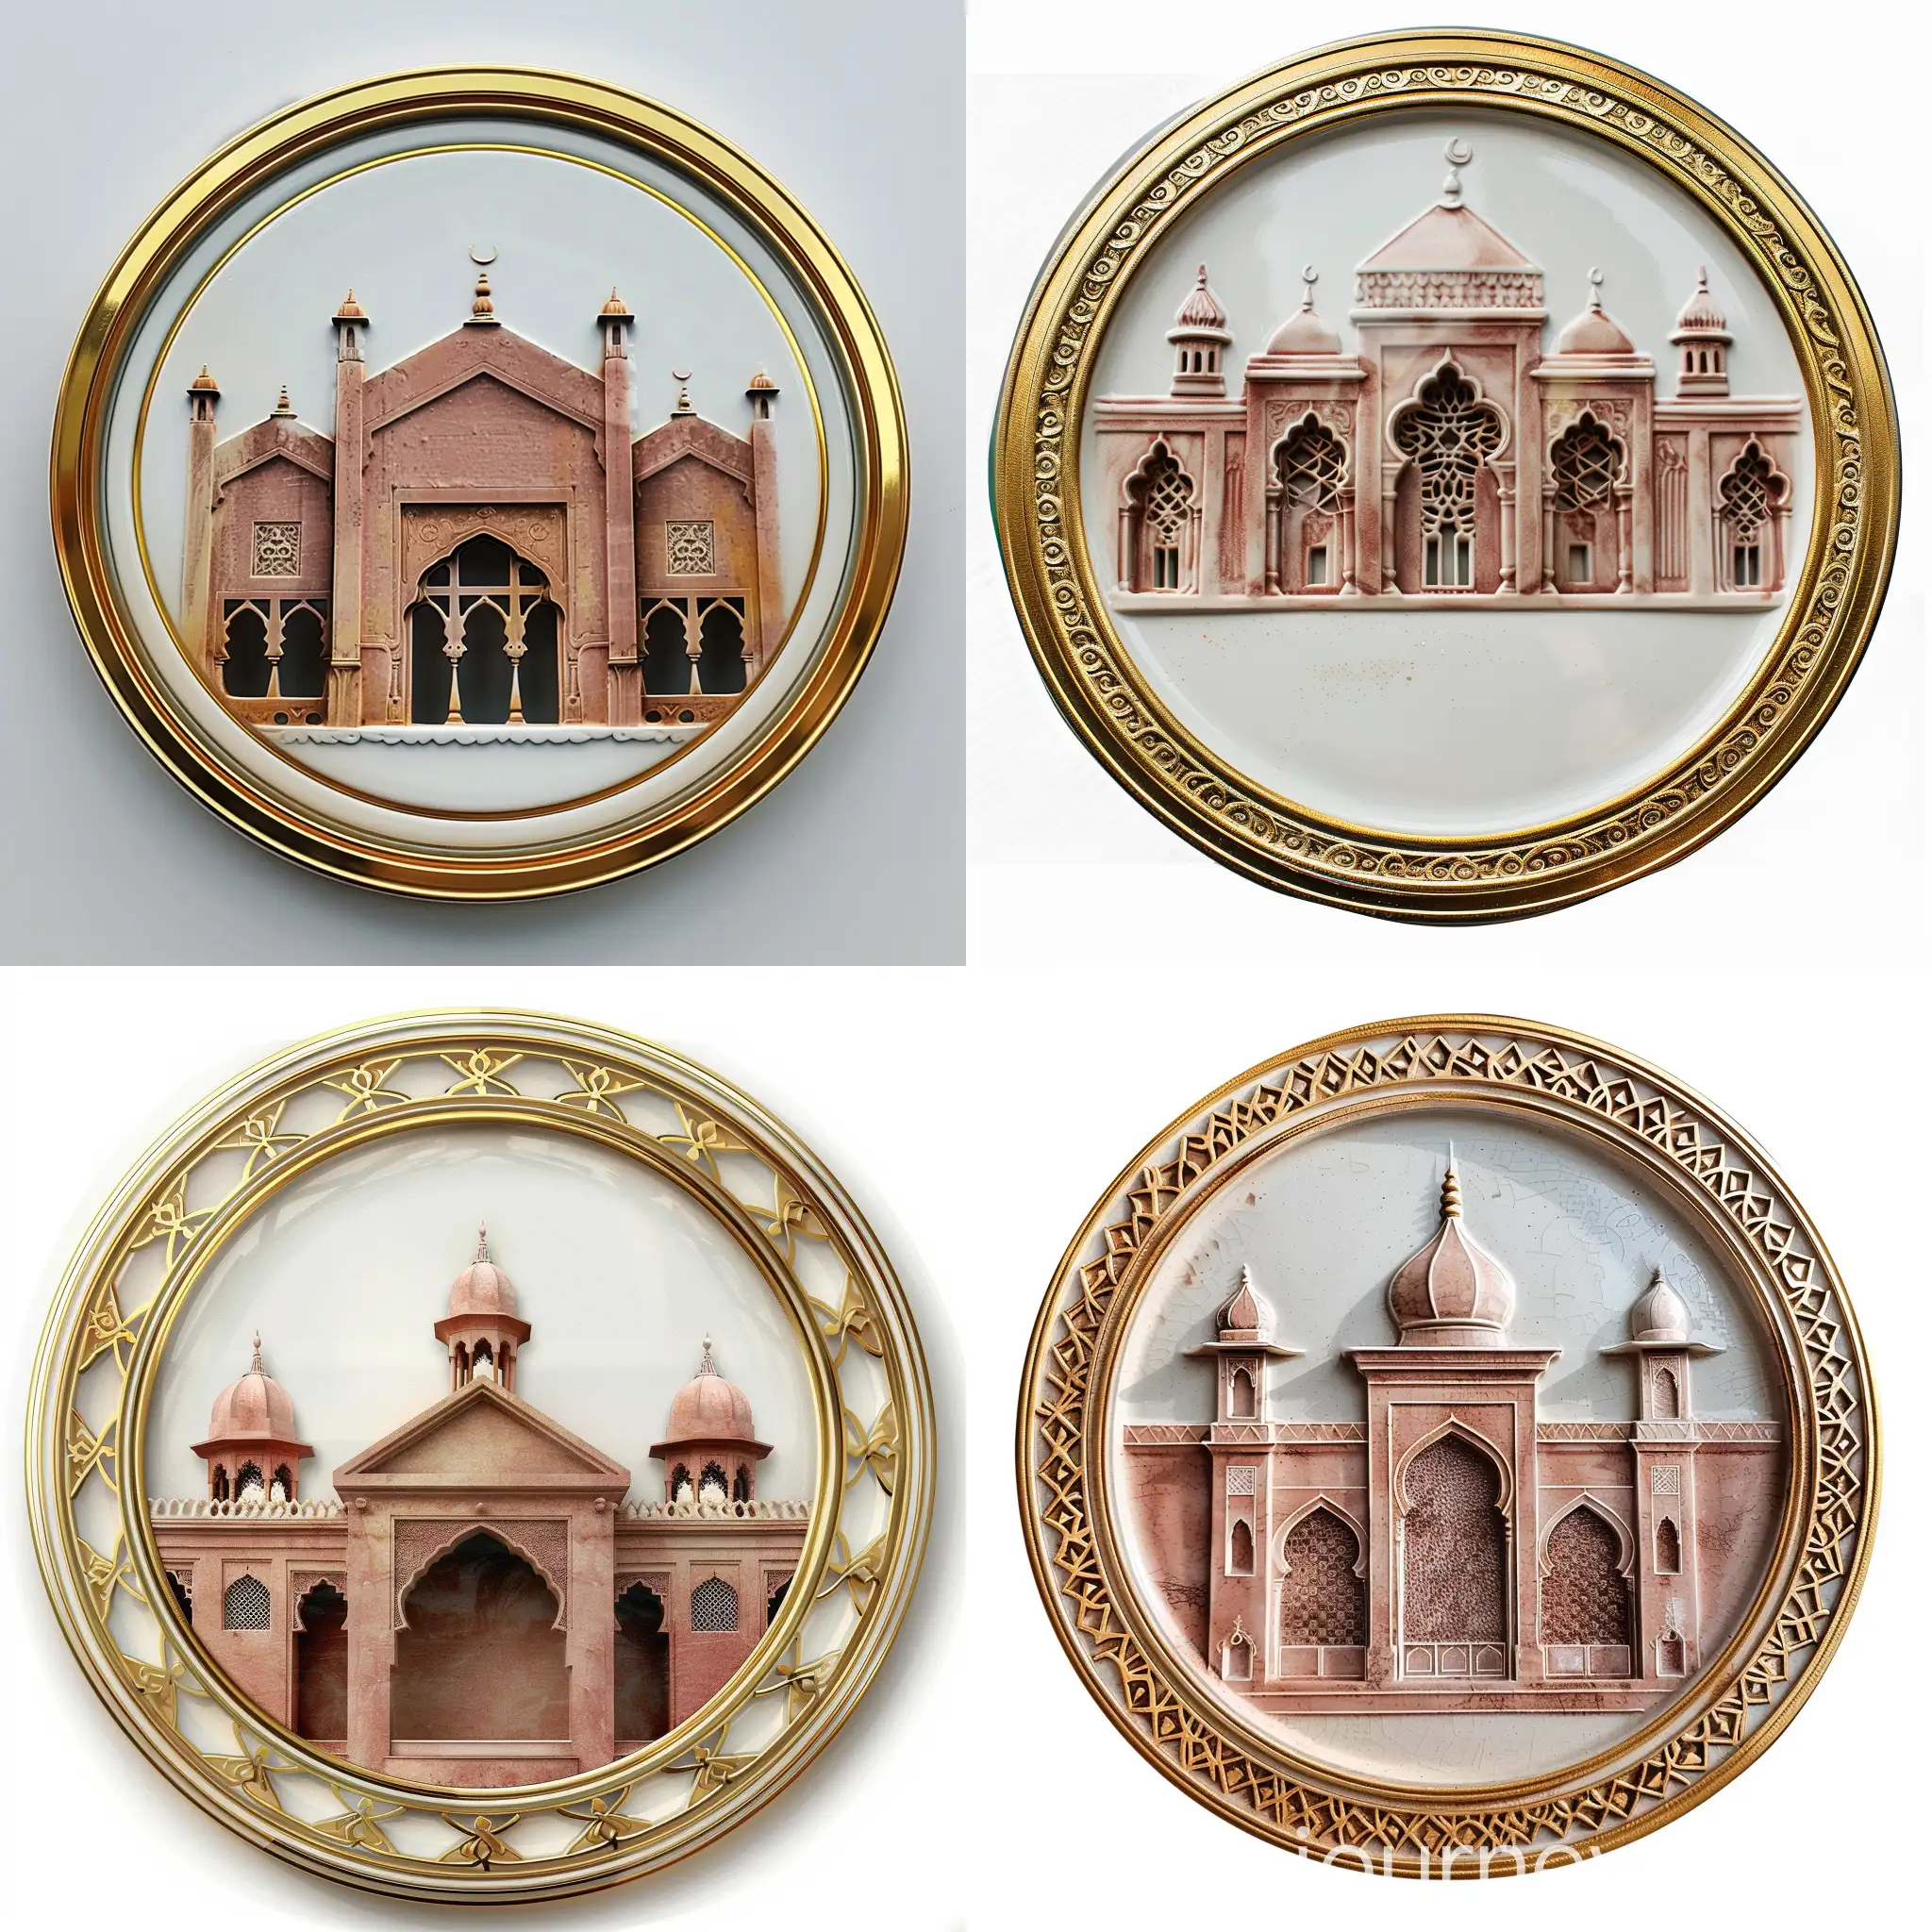 Embossed on a round porcelain medallion having 3d solid arabesque openwork and golden border --cref https://cdn.discordapp.com/attachments/1213041174428782623/1230017704098922546/Strachey_Hall_S.S.South_AligarhMuslimUniversity_._._Join-amu_info_Now._._amuinfo_PC_-the_vibrant.clicks_Aligarh_Muslim_University_campusphotography_amuinfo.webp.jpg?ex=6631ca41&is=661f5541&hm=1377dd5f1c7bf3e22ce49ca0c2a9d620c434ee8bbb53dd12c24a1911c961719f& --cw 100